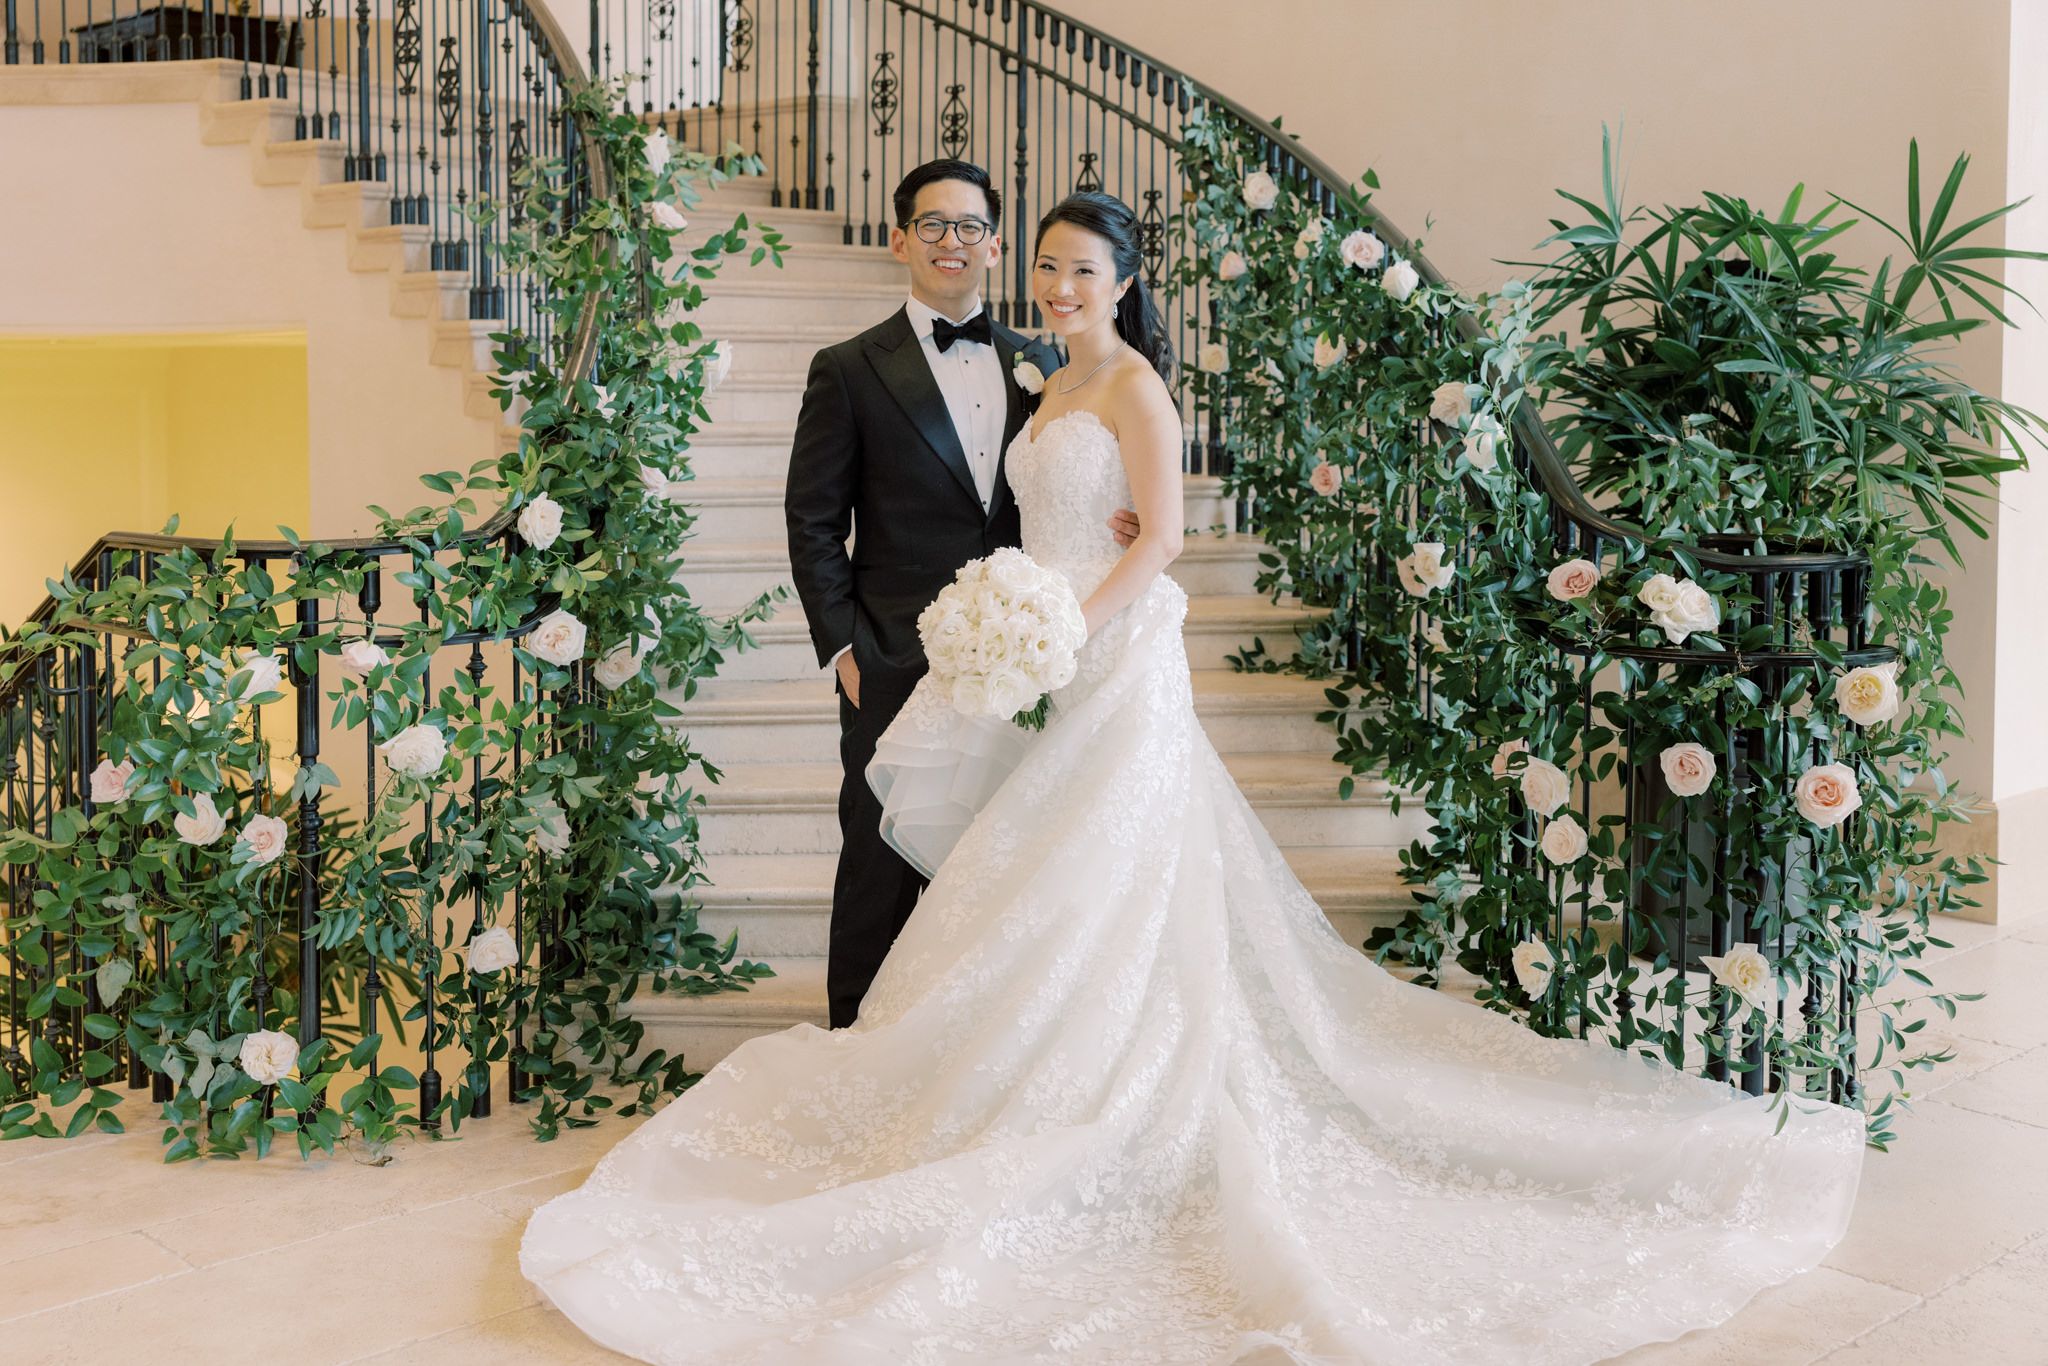 The bride and the groom are standing on the bottom of the staircase, which is filled with many vines and white flowers. Image by Jenny Fu Studio